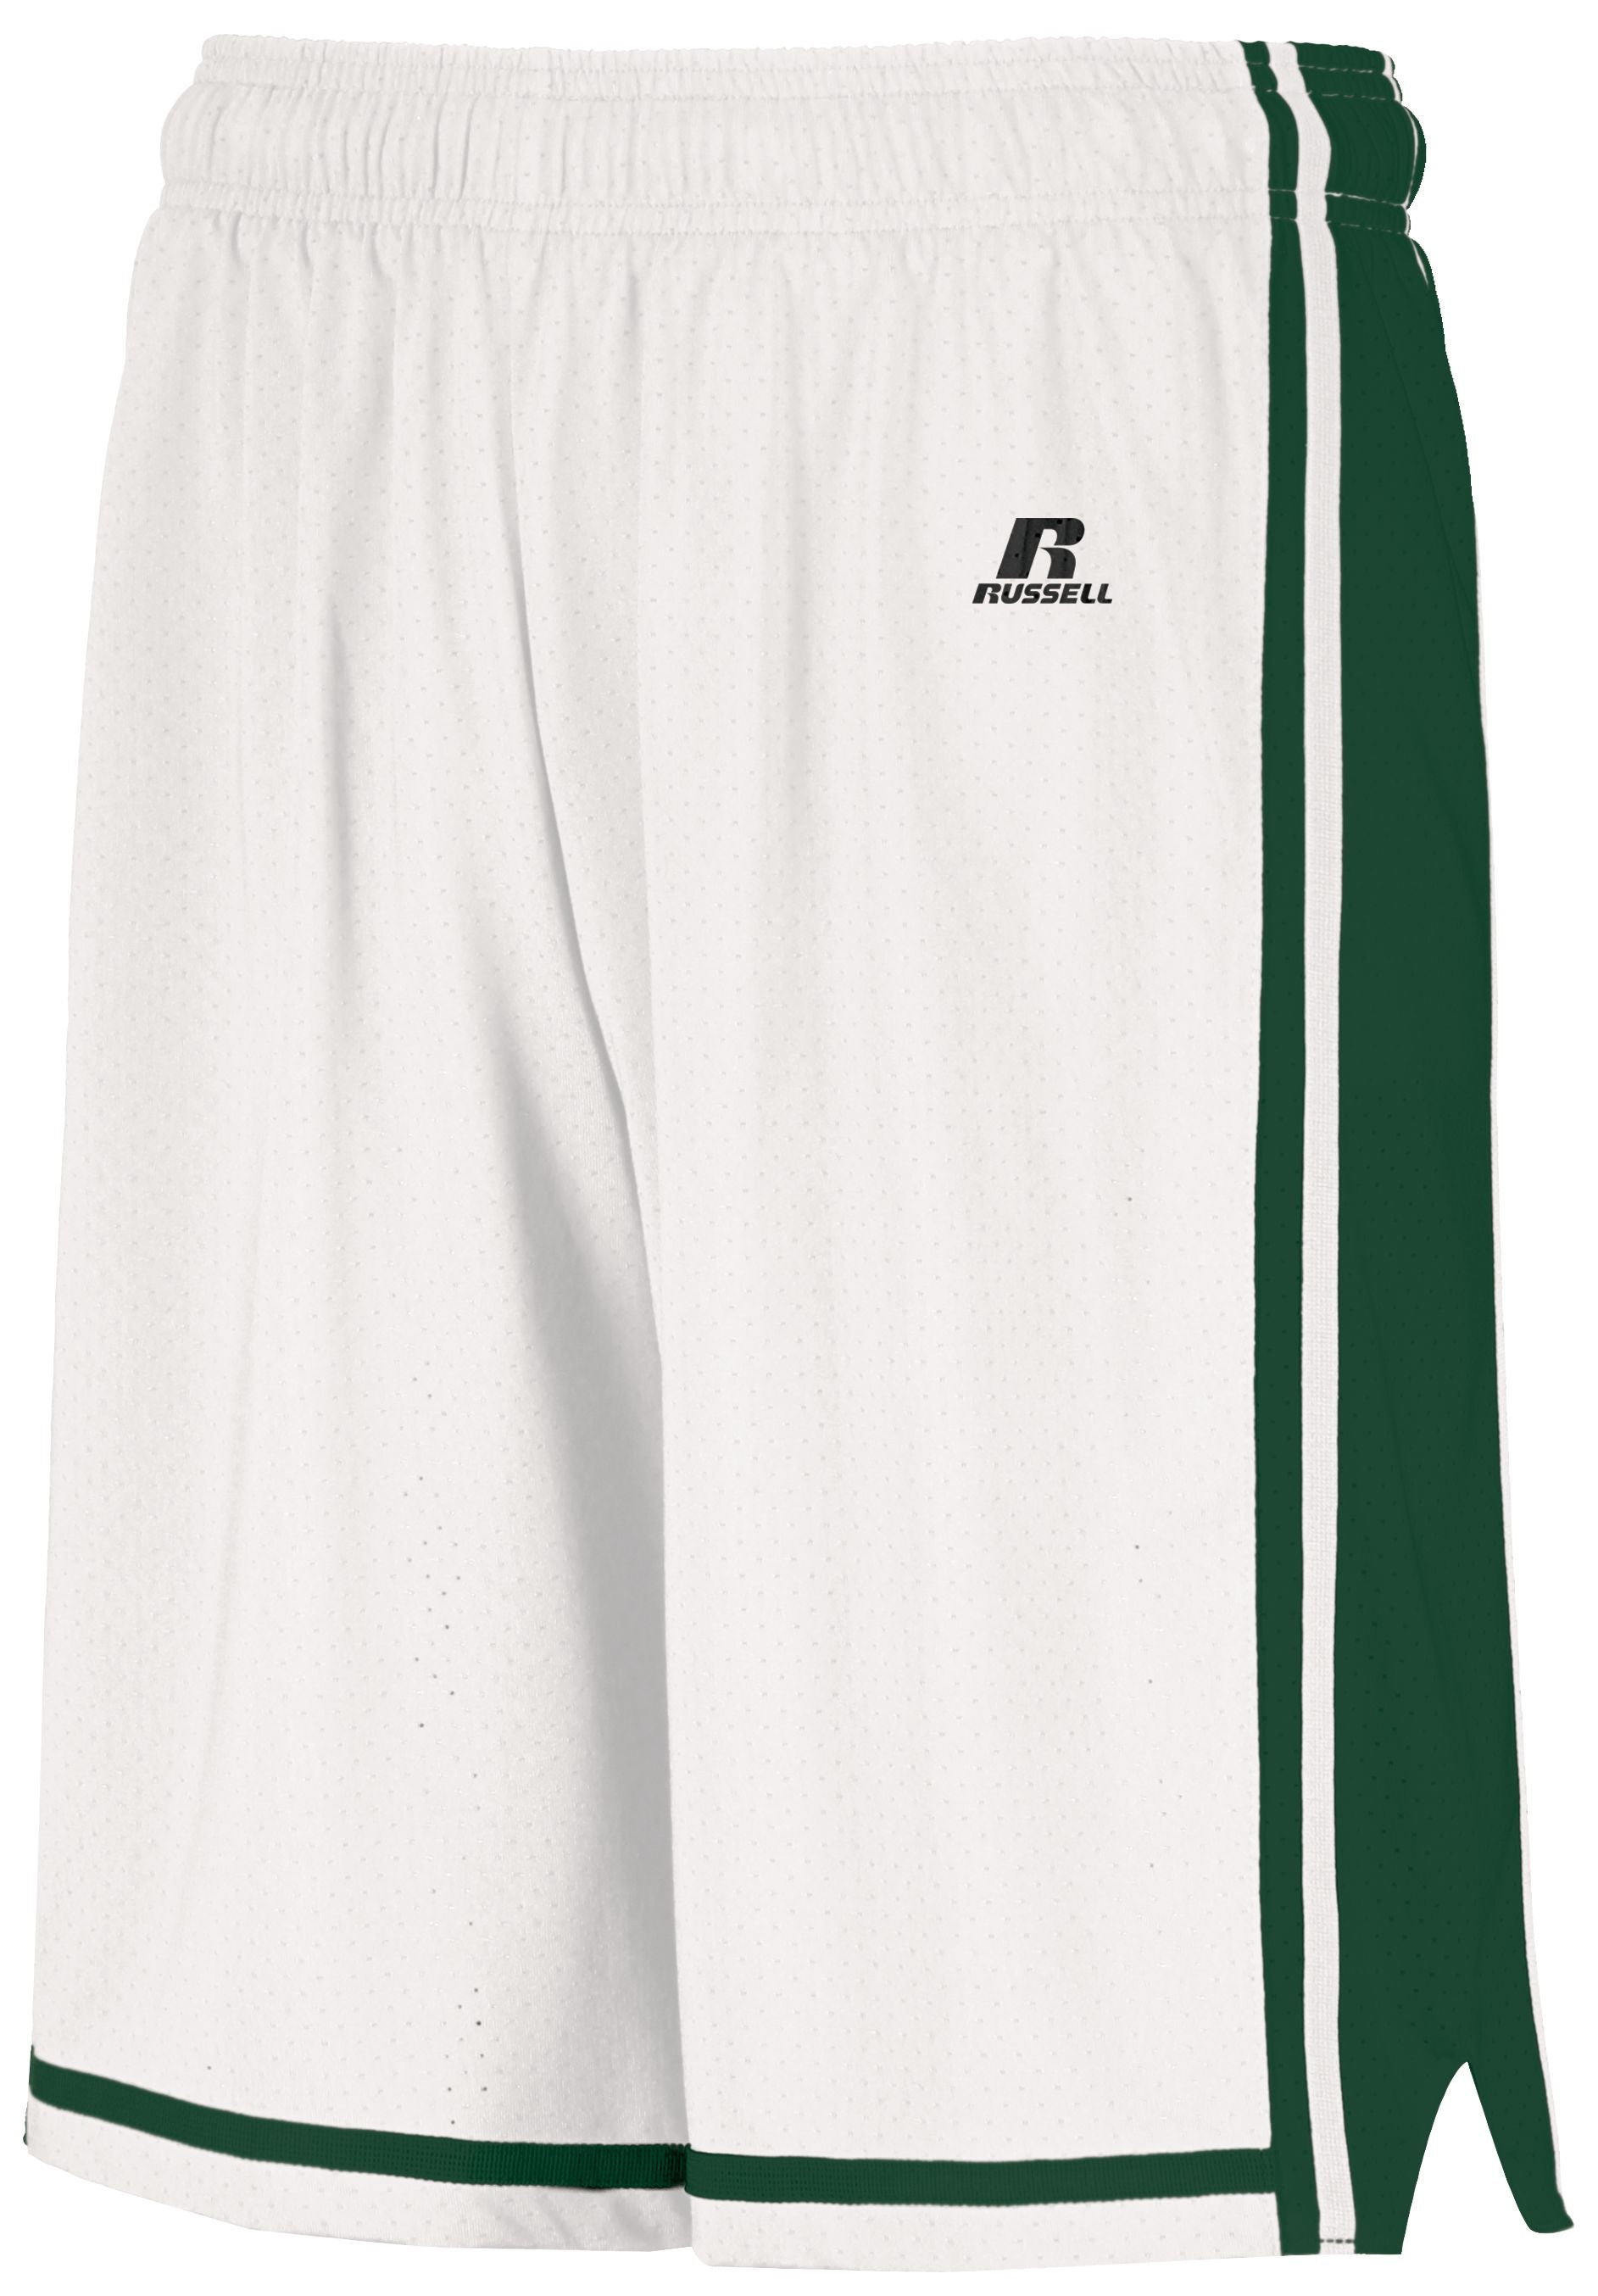 Russell Athletic Youth Legacy Basketball Shorts in White/Dark Green  -Part of the Youth, Youth-Shorts, Basketball, Russell-Athletic-Products, All-Sports, All-Sports-1 product lines at KanaleyCreations.com